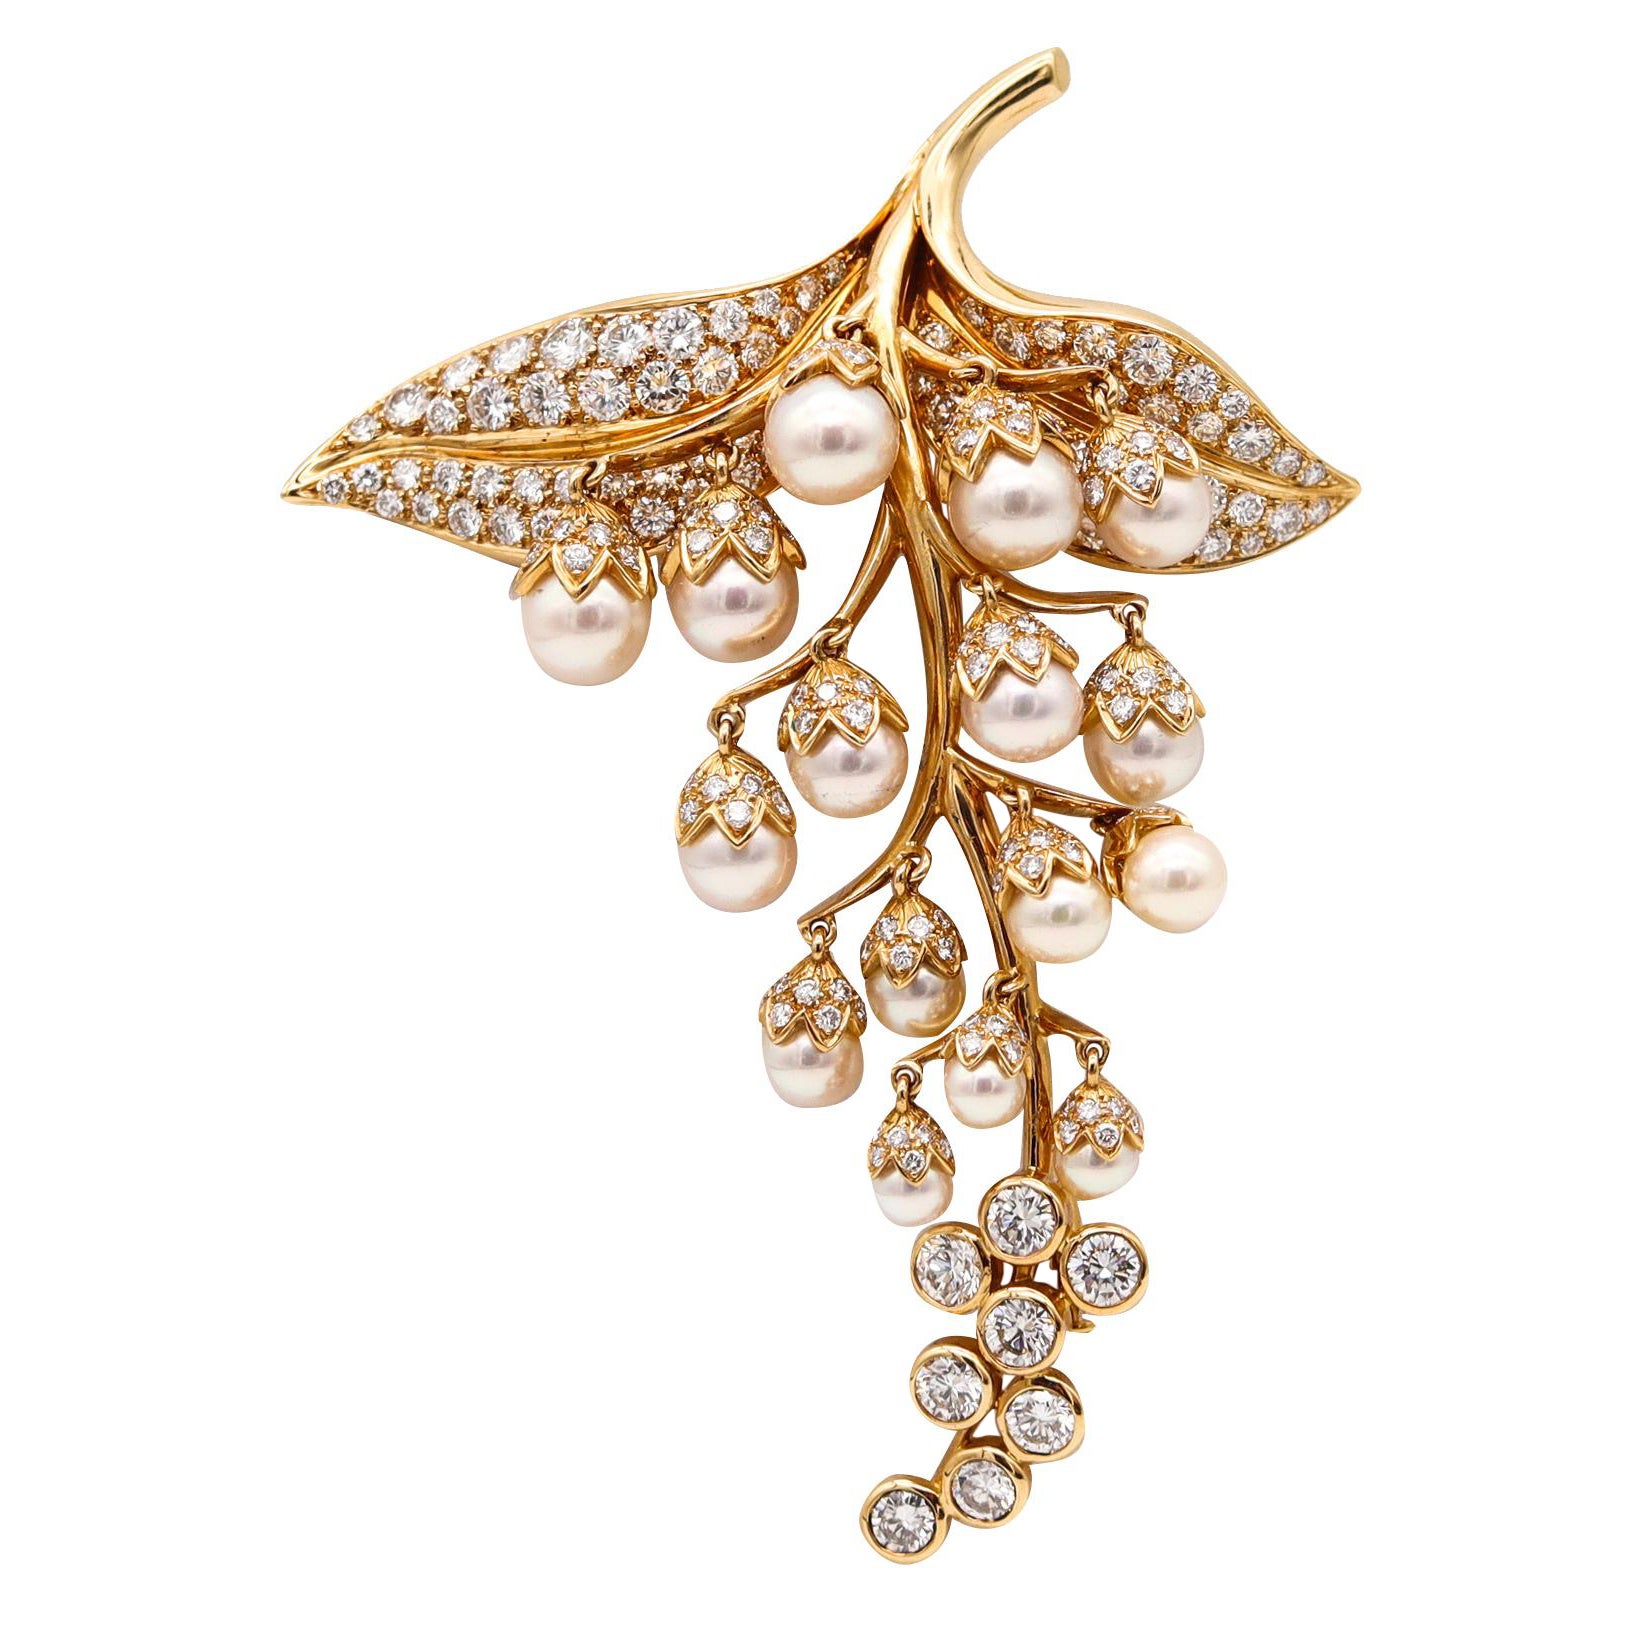 Rene Boivin Paris Gem Set Brooch 18kt Gold with 14.09ctw in Diamonds and Pearls For Sale